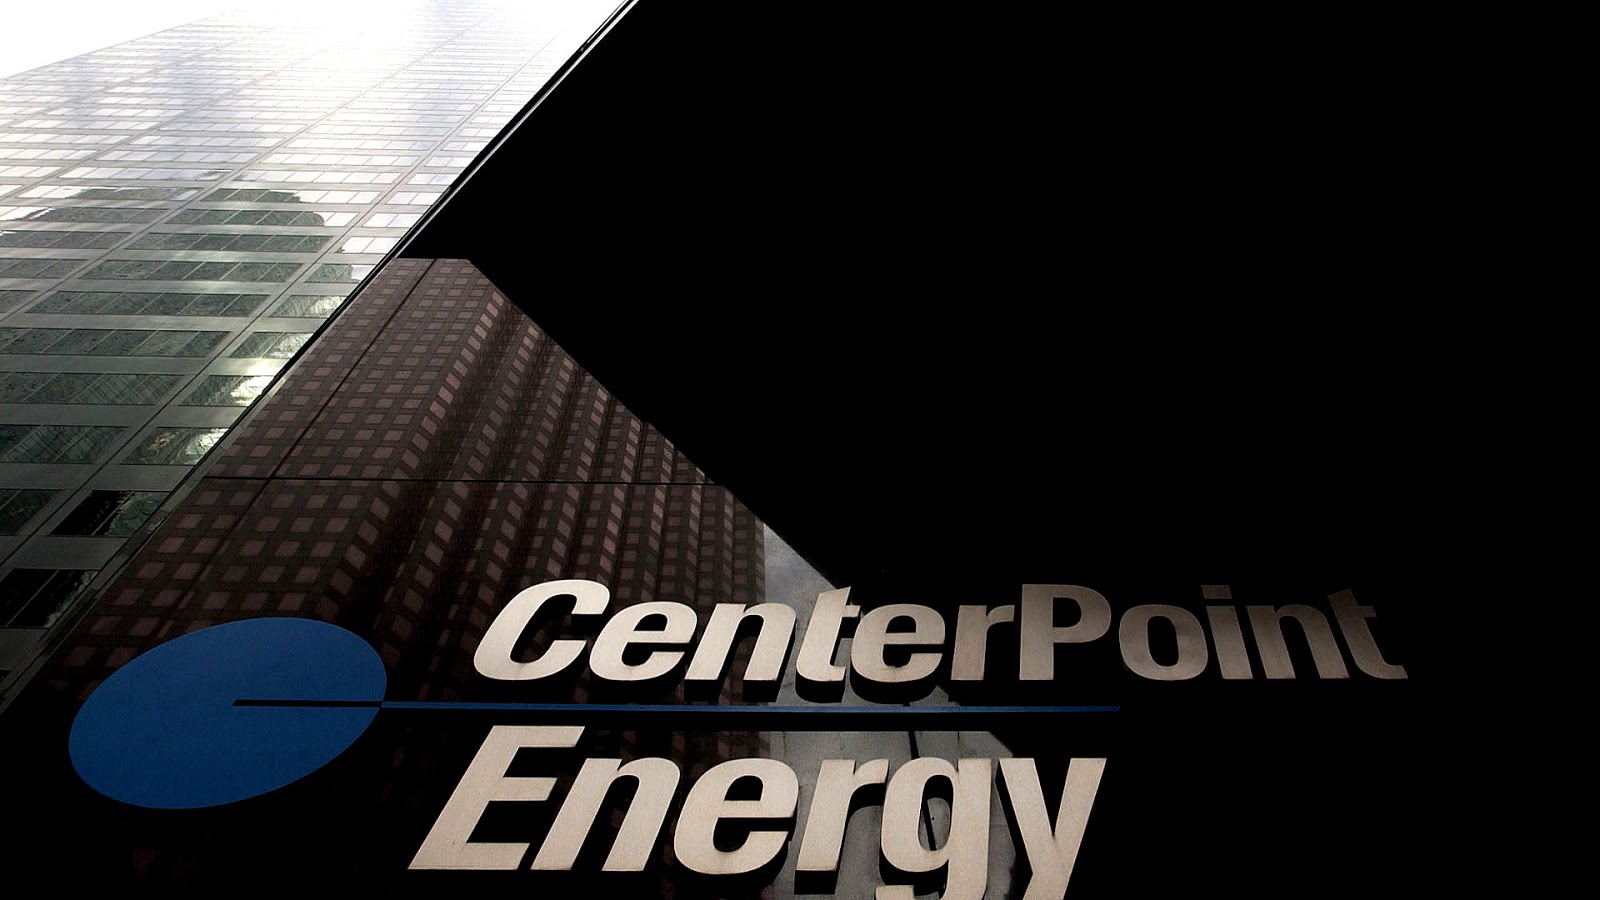 What Is The Phone Number For Centerpoint Energy